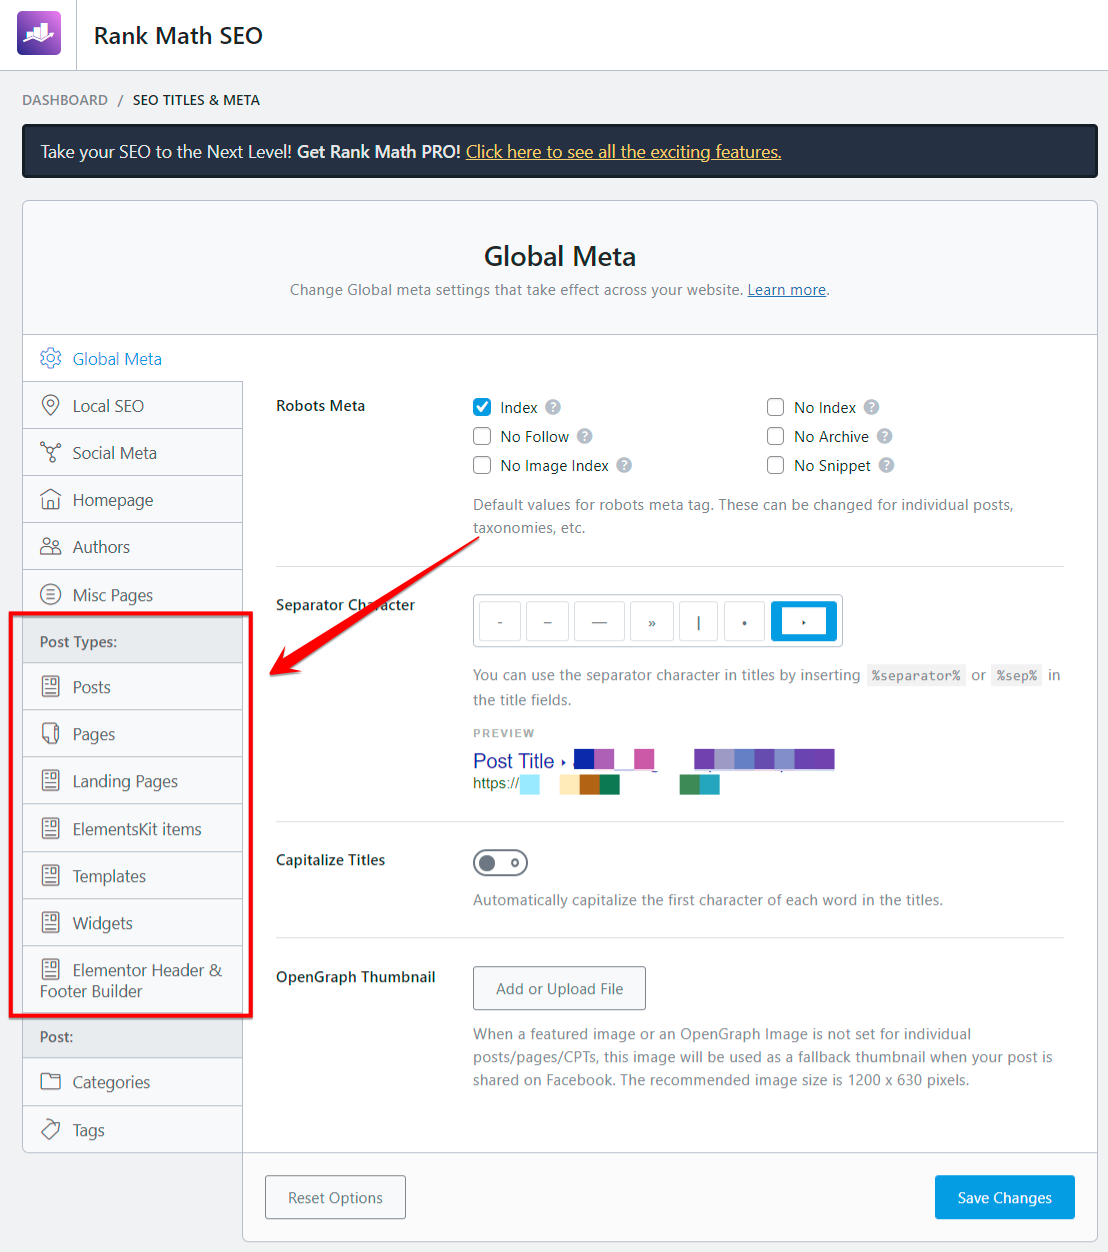 Rank Math global SEO settings with Elementor and related plugins